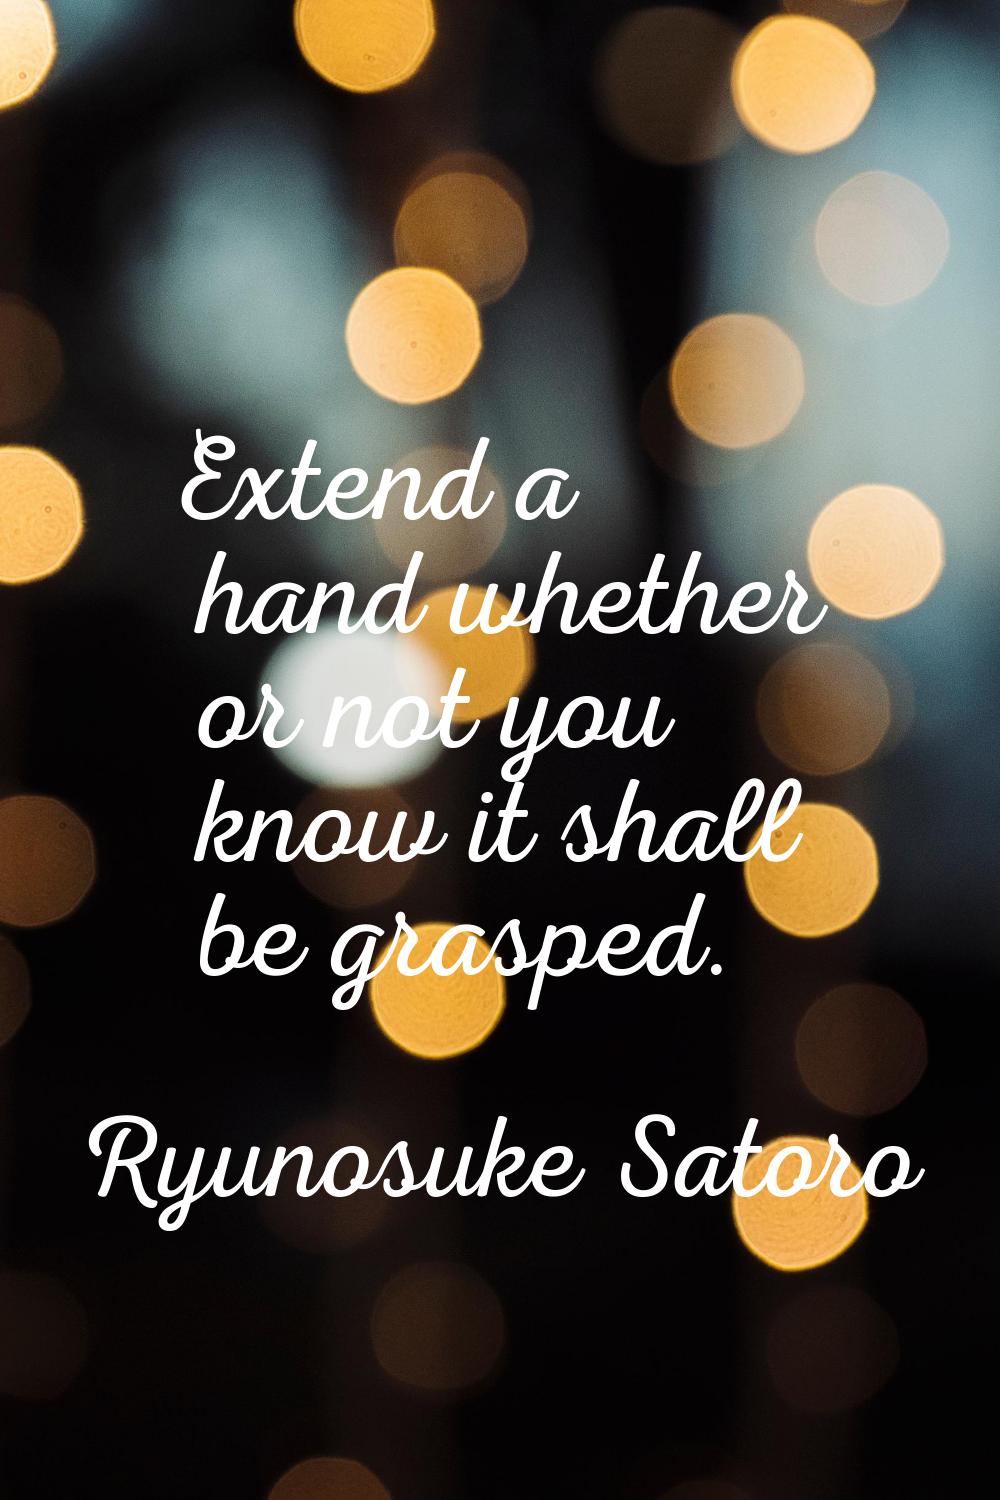 Extend a hand whether or not you know it shall be grasped.